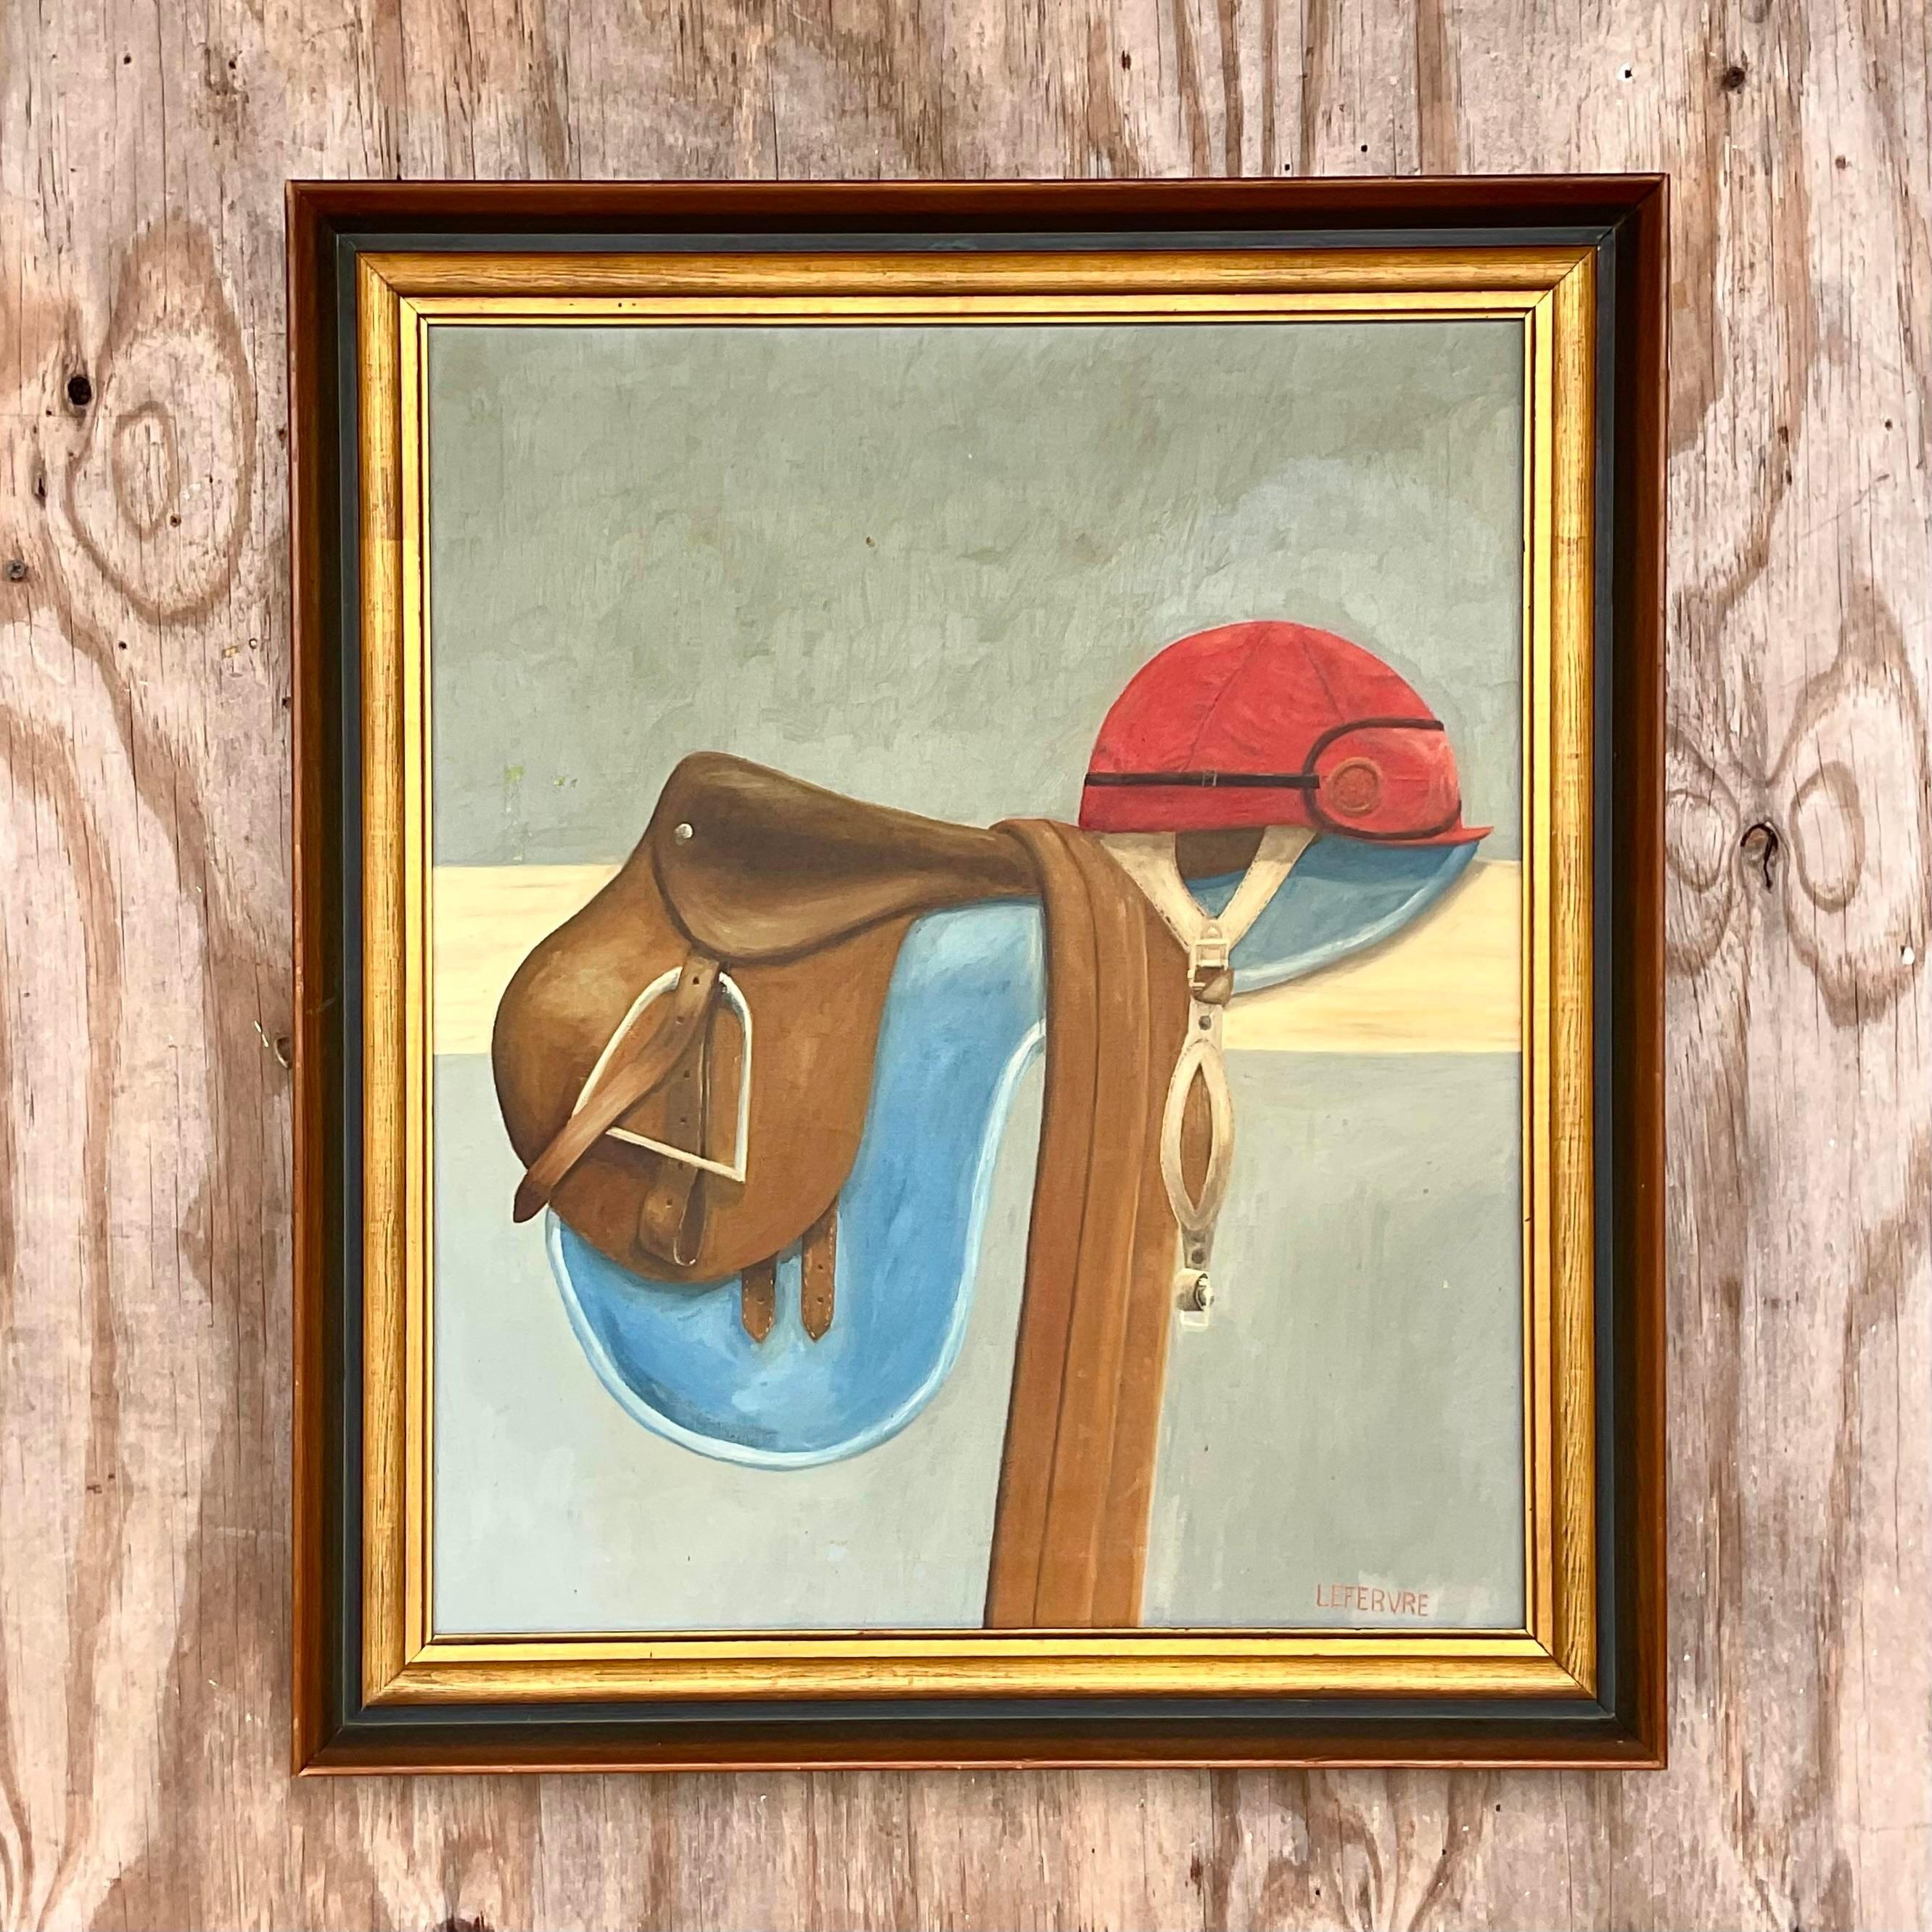 Vintage Boho Riding Gear Signed Original Oil Painting on Canvas 1